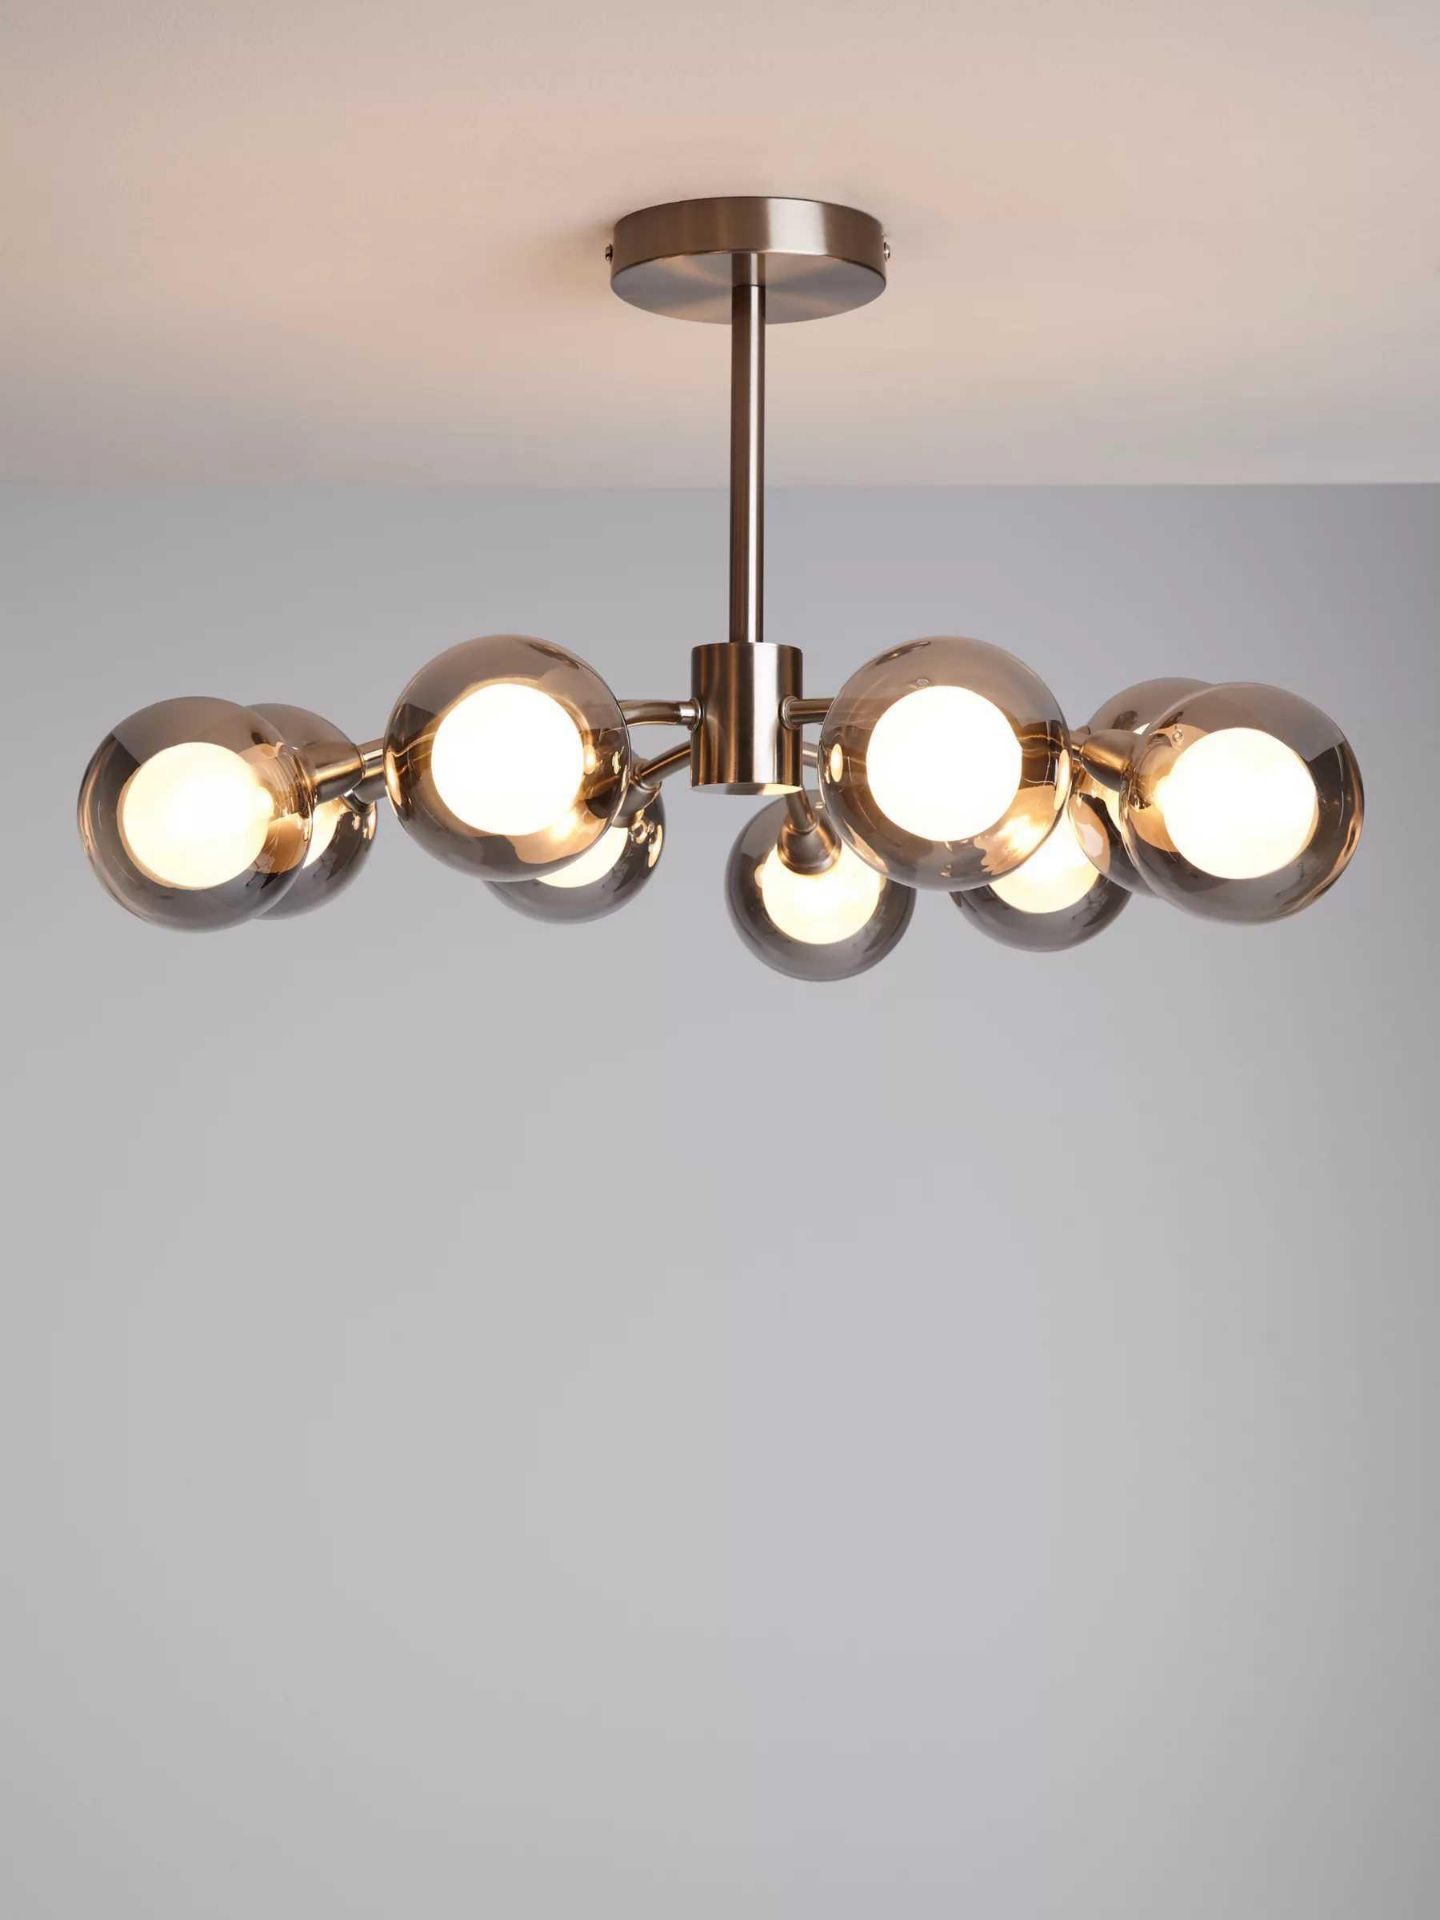 RRP £215 Boxed John Lewis And Partners Huxley 9 Light Ceiling Light (614206) (Appraisals Available